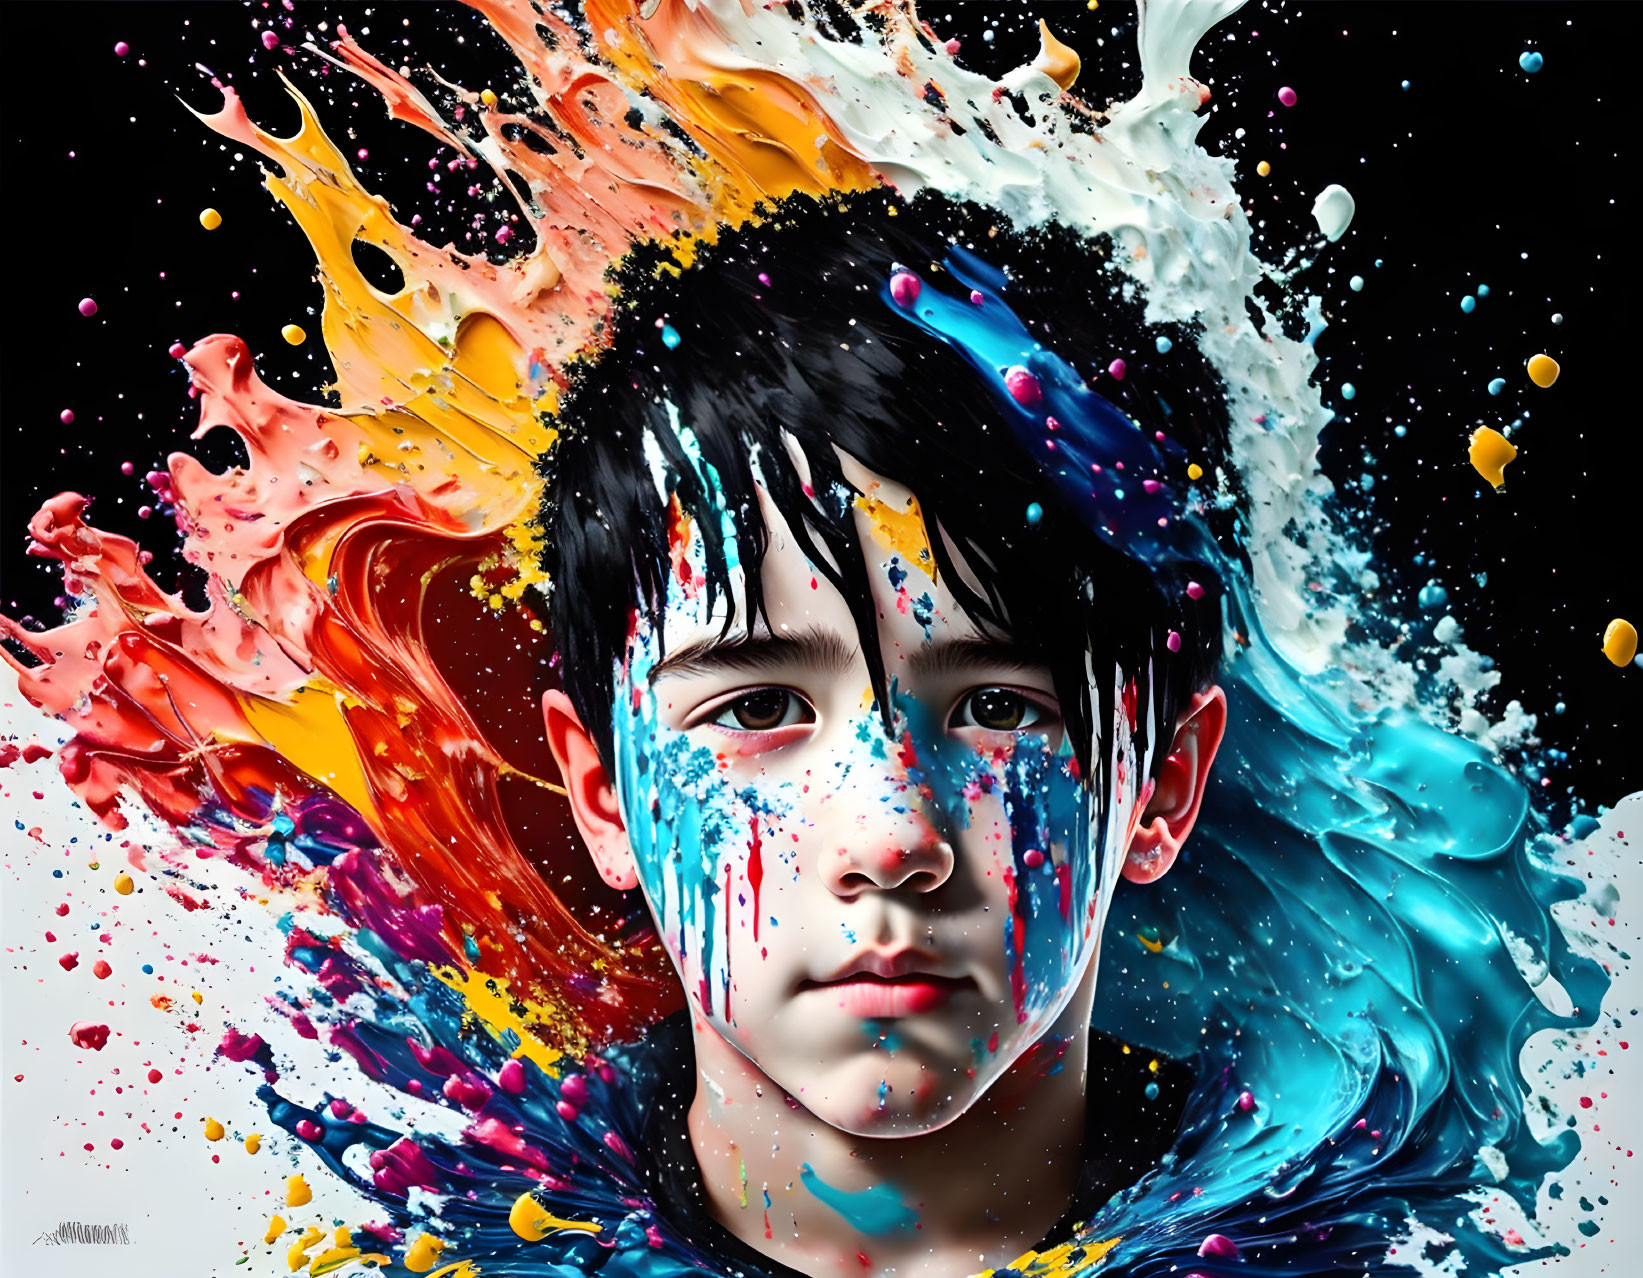 Child portrait with serious expression in vibrant paint splashes on black background